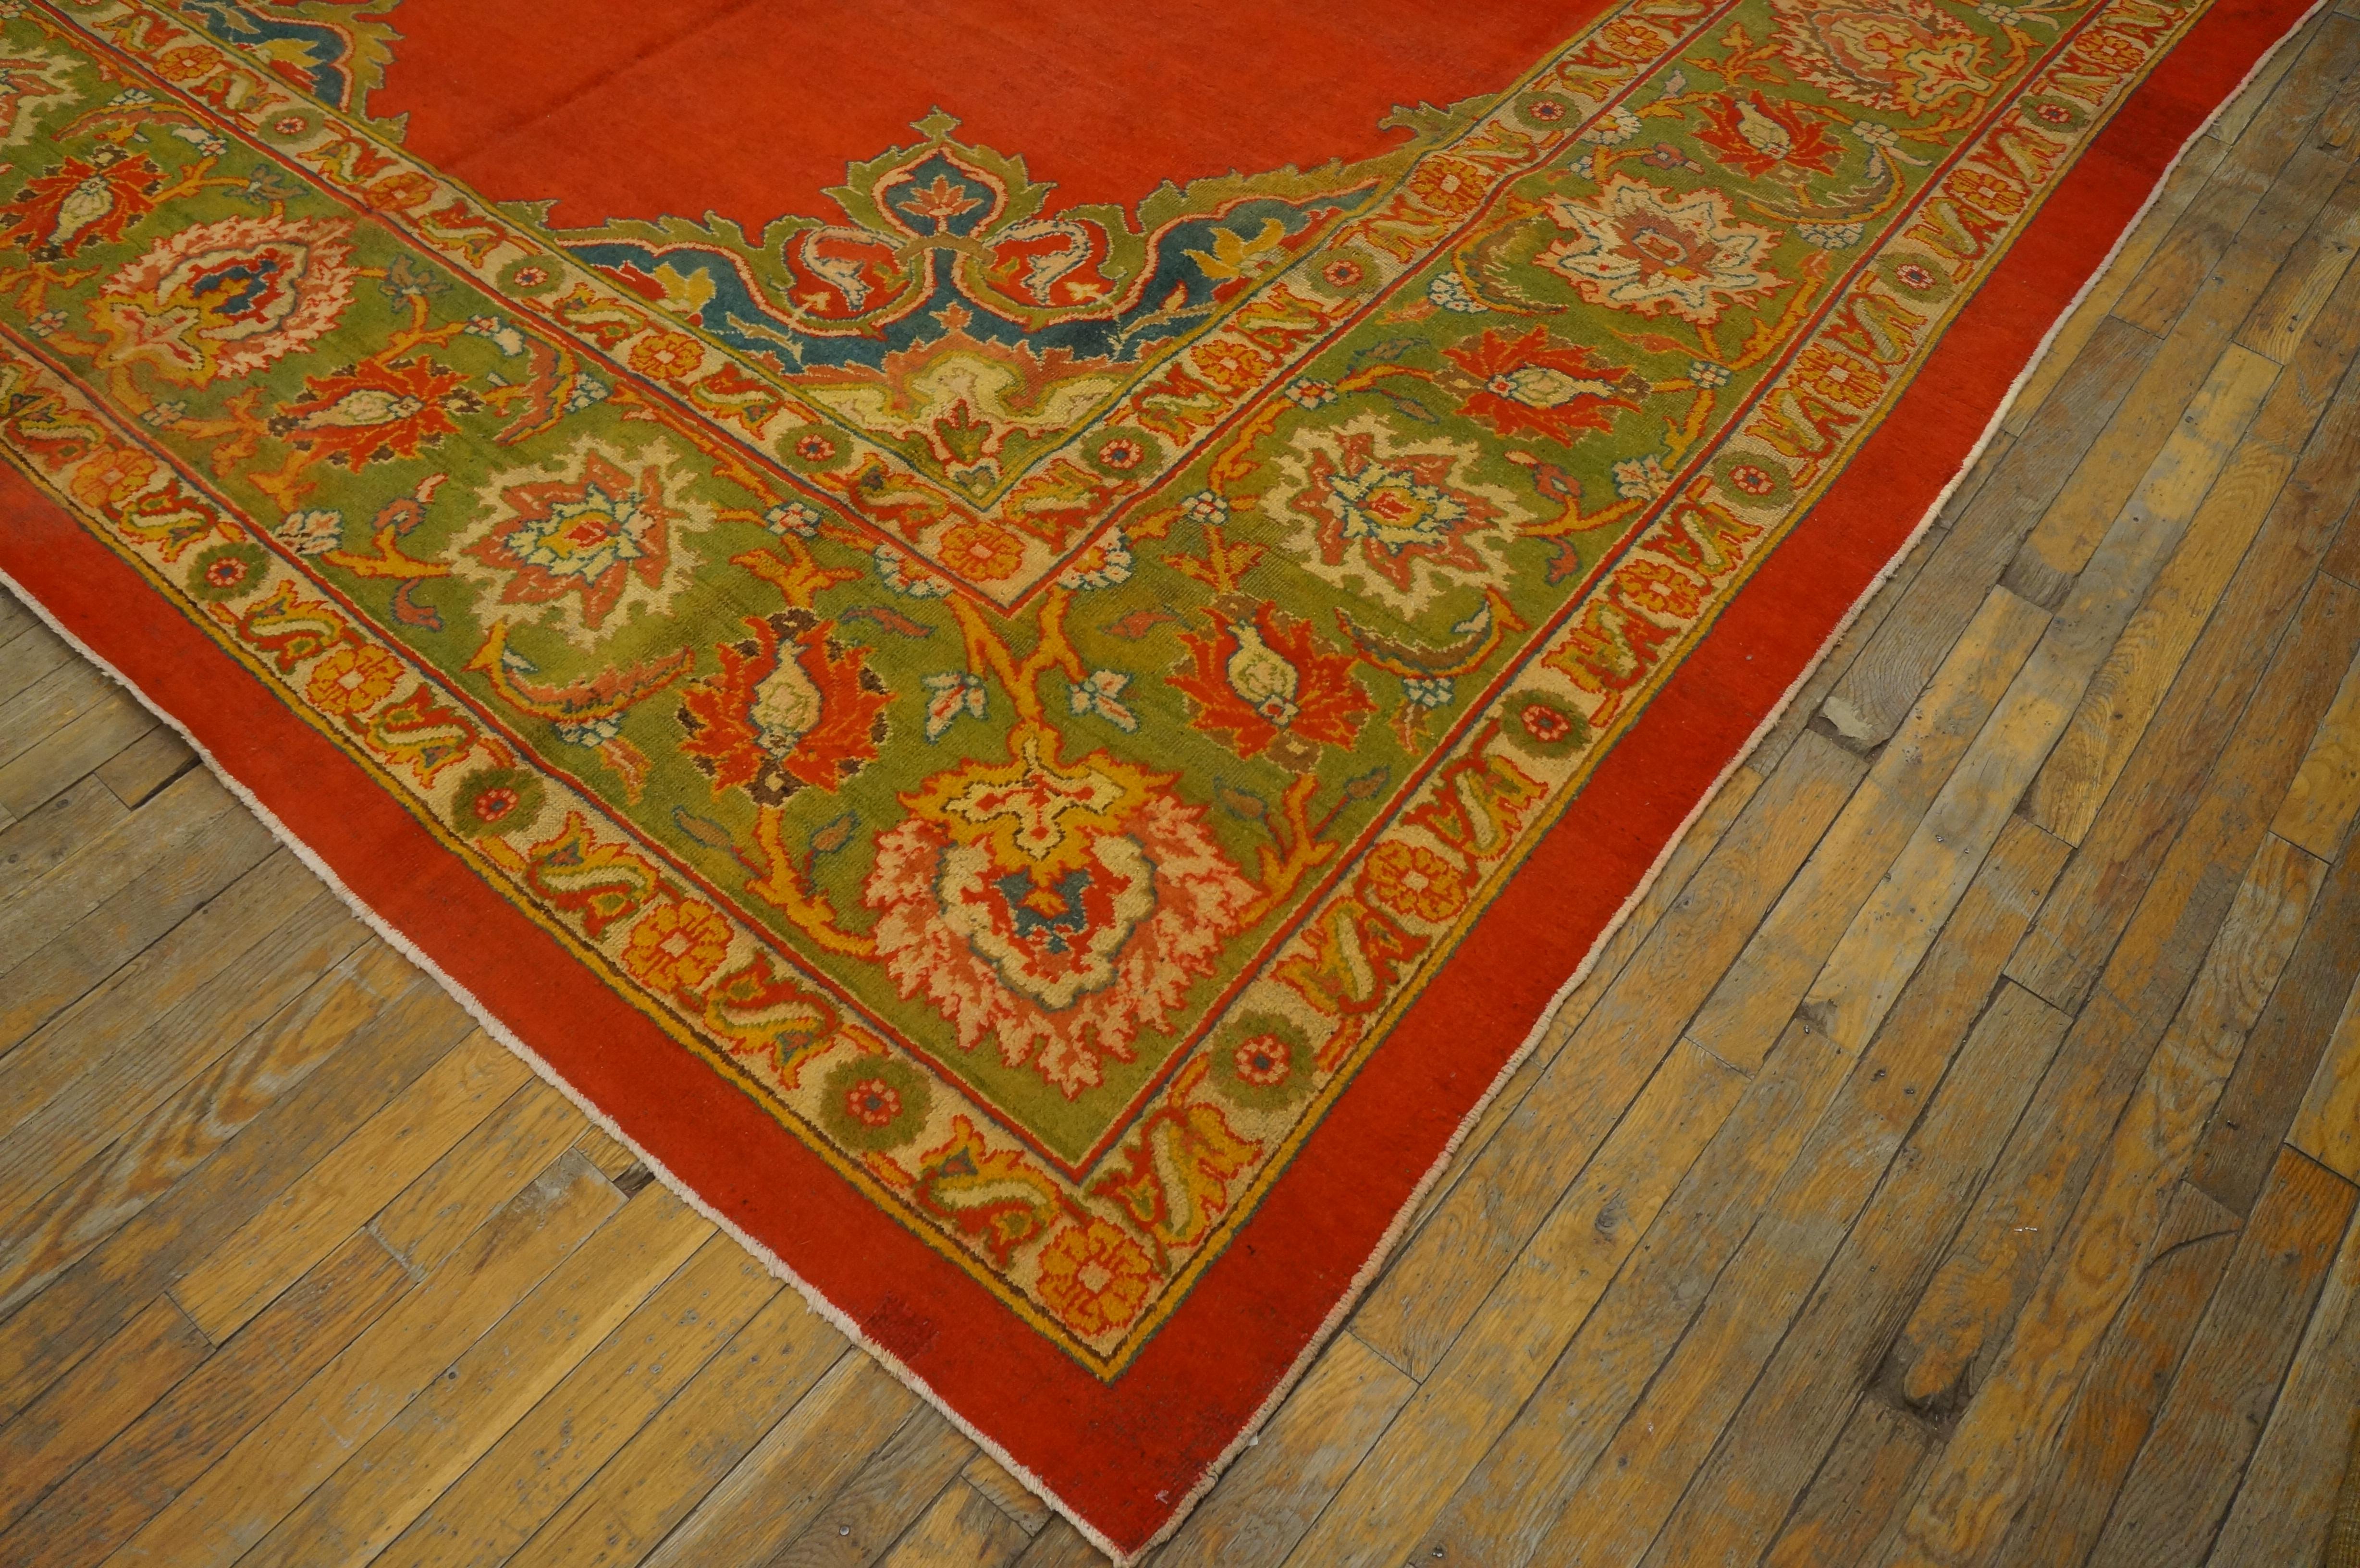 Early 20th Century N. Indian Amritsar Carpet ( 9' x 12' - 275 x 365 )

This attractive c. 1900 Indian carpet gets everything right:open clear red field, eight lobe ultra-classic medallion with yellow accents and matching navy quarter corners; and a